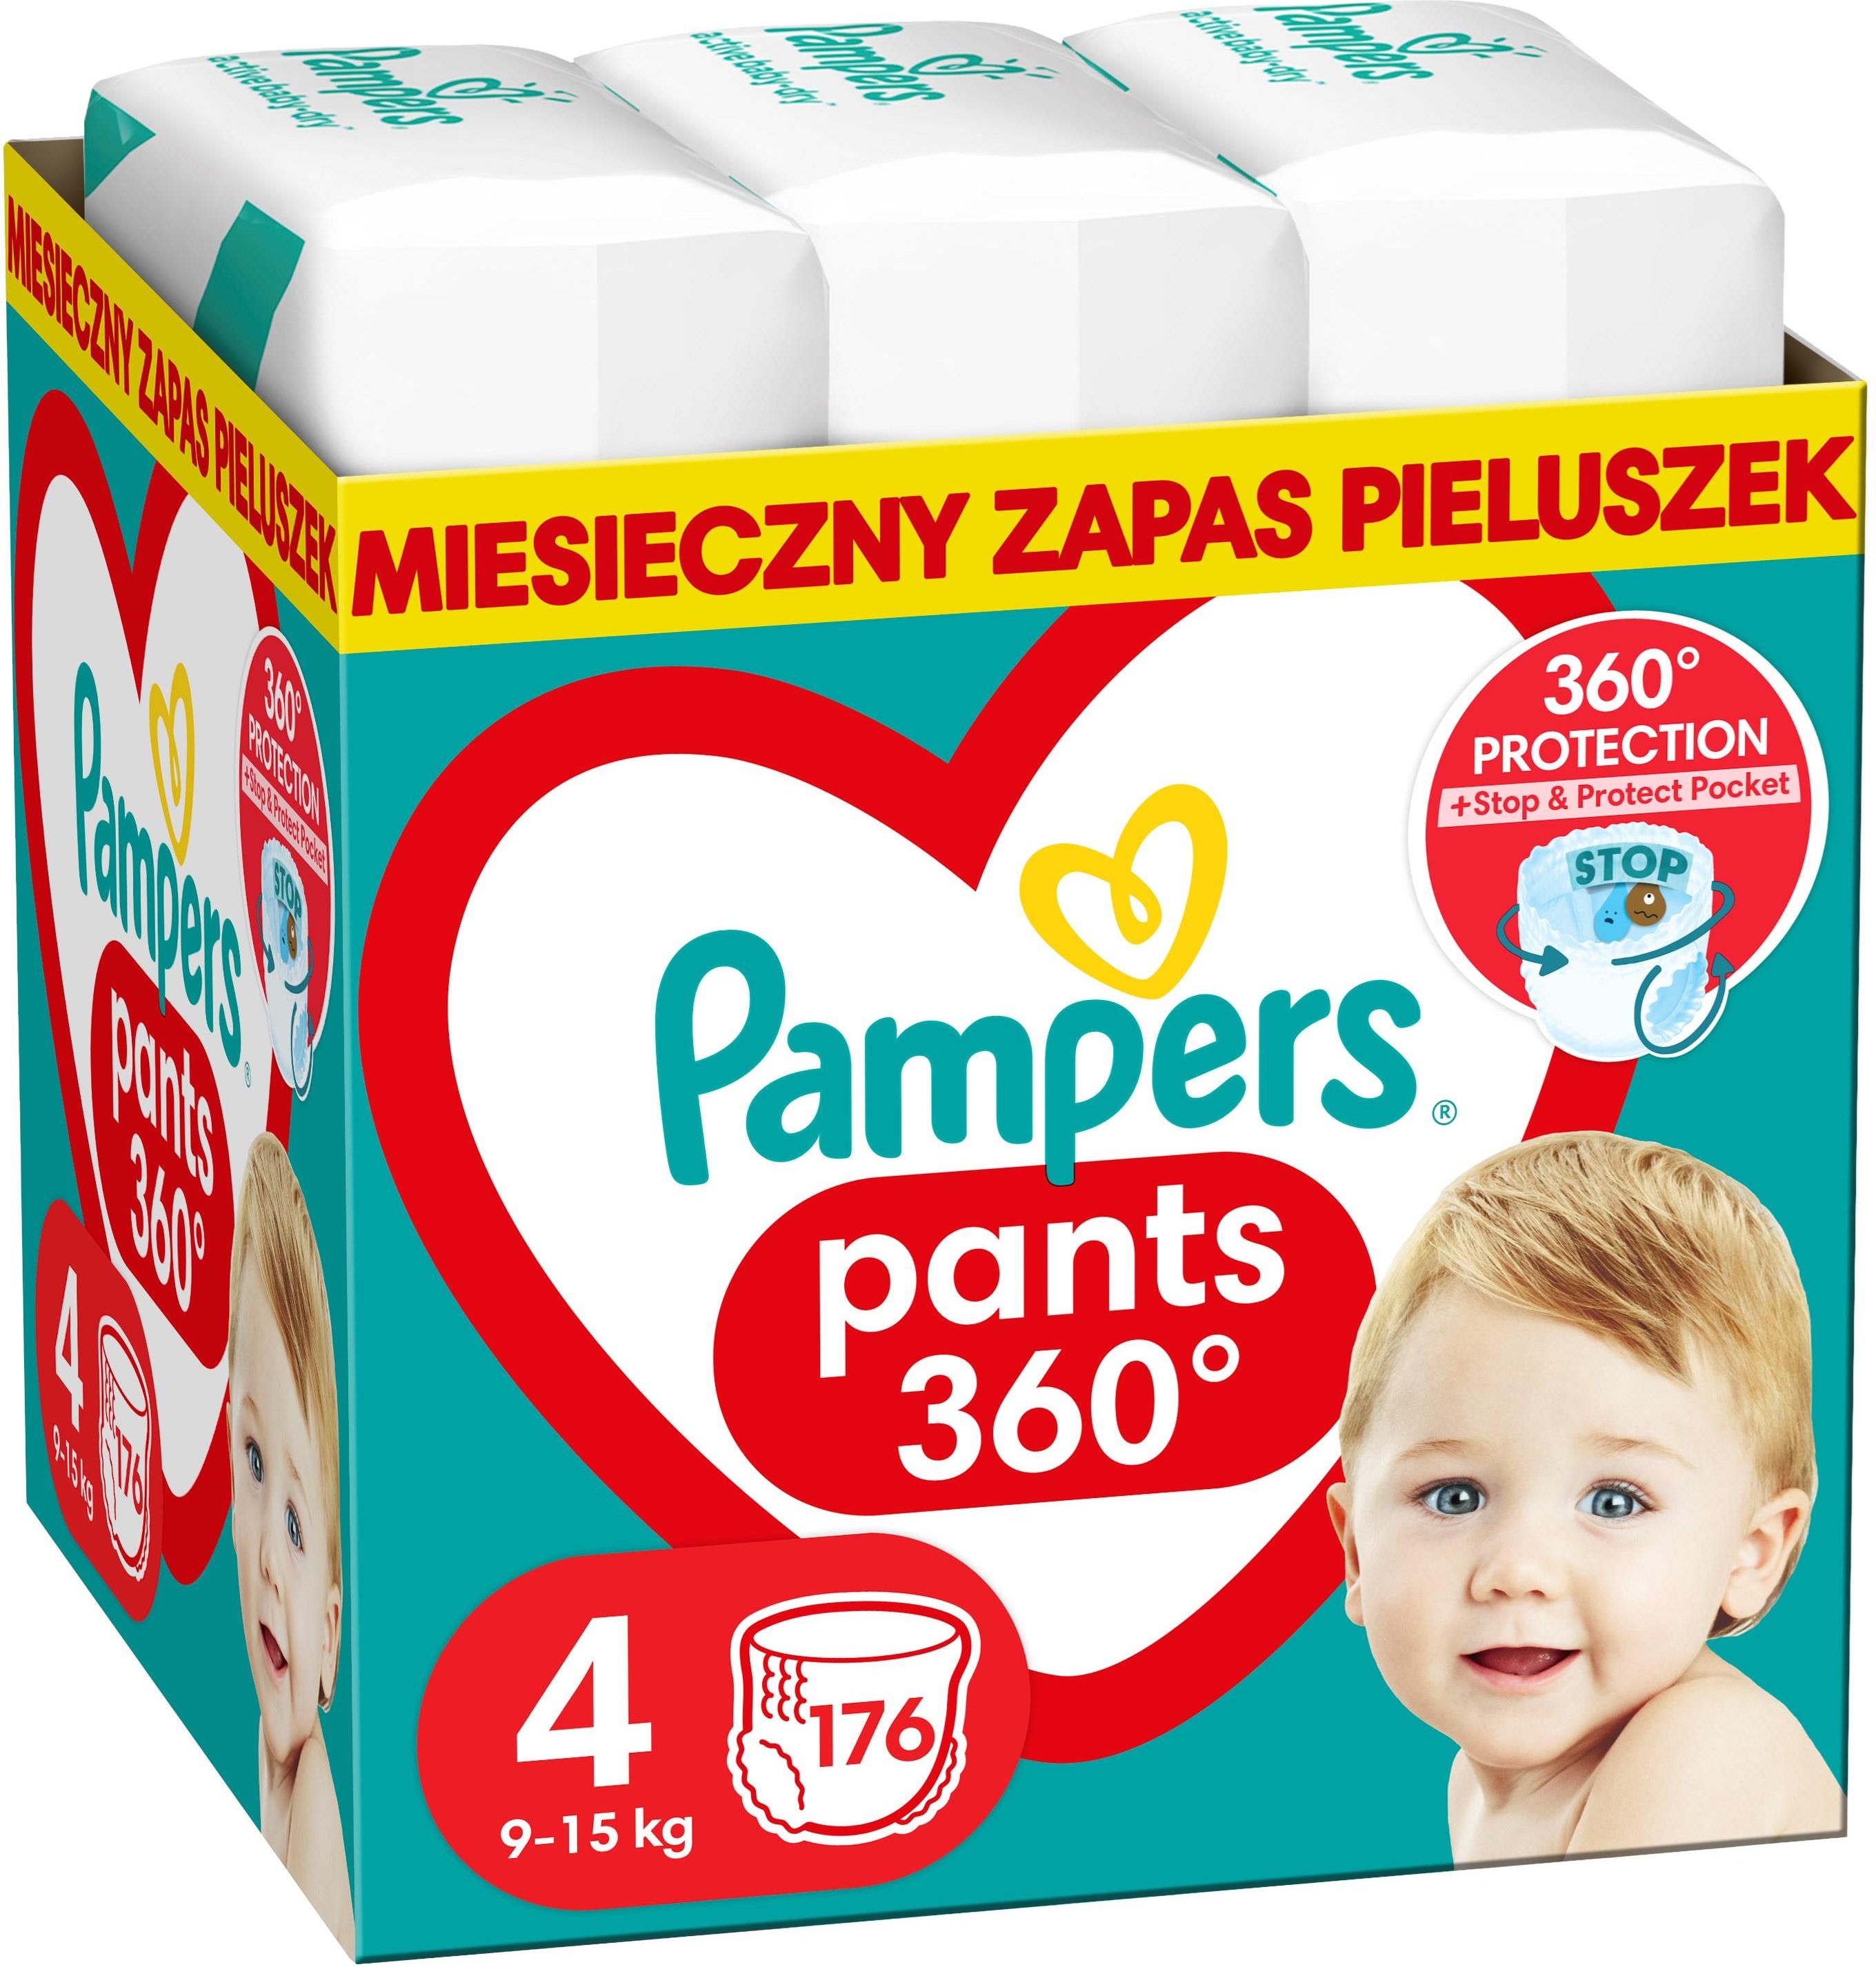 filmy o pampers